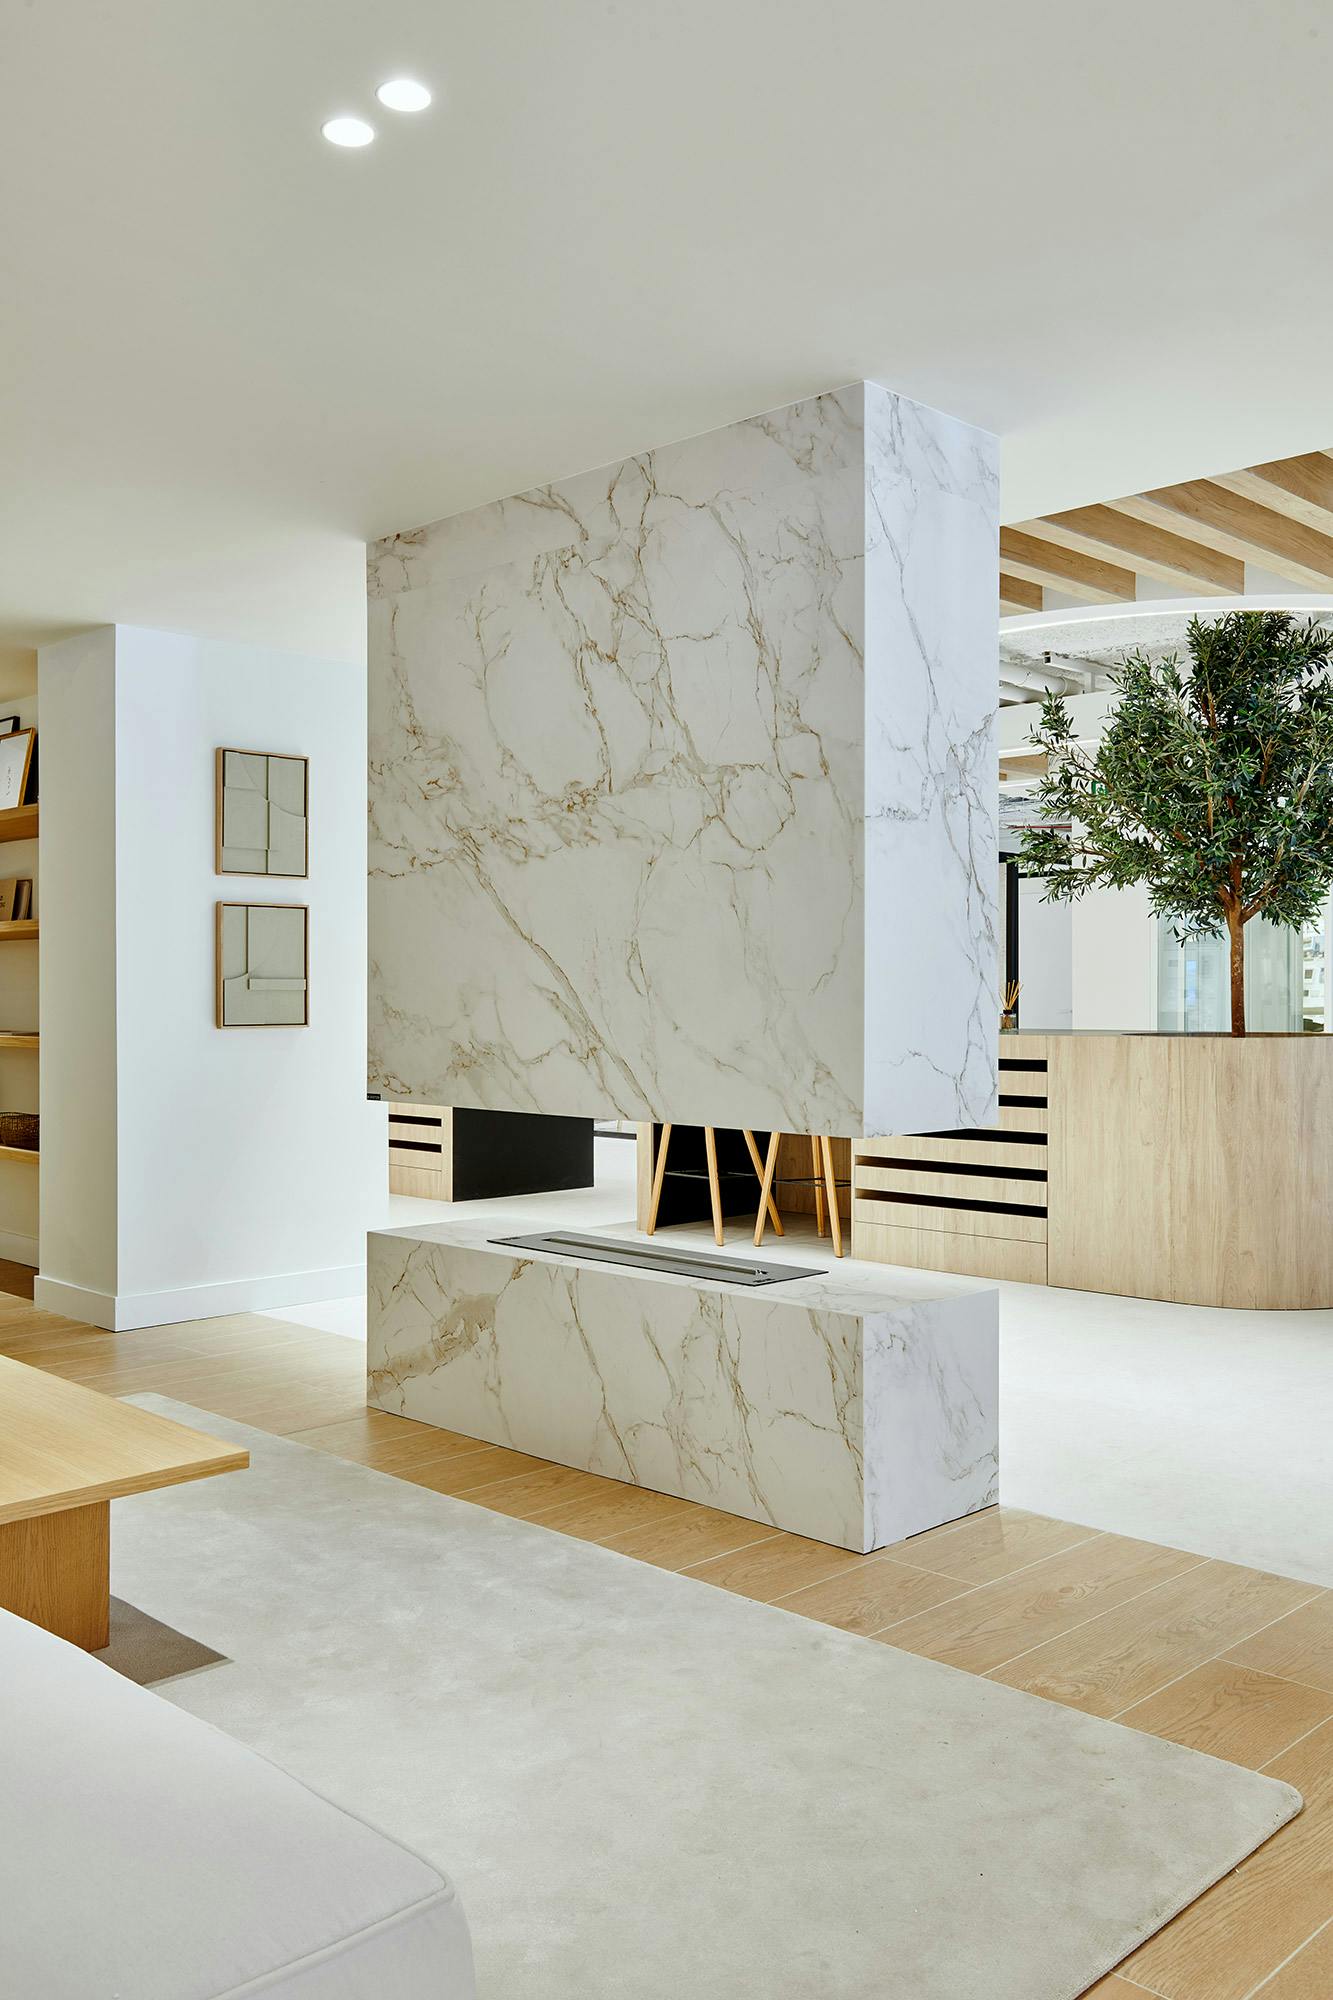 Numéro d'image 76 de la section actuelle de Cosentino, the star of the new functional, modern and sustainable house in the AEDAS Homes showroom in Madrid de Cosentino France